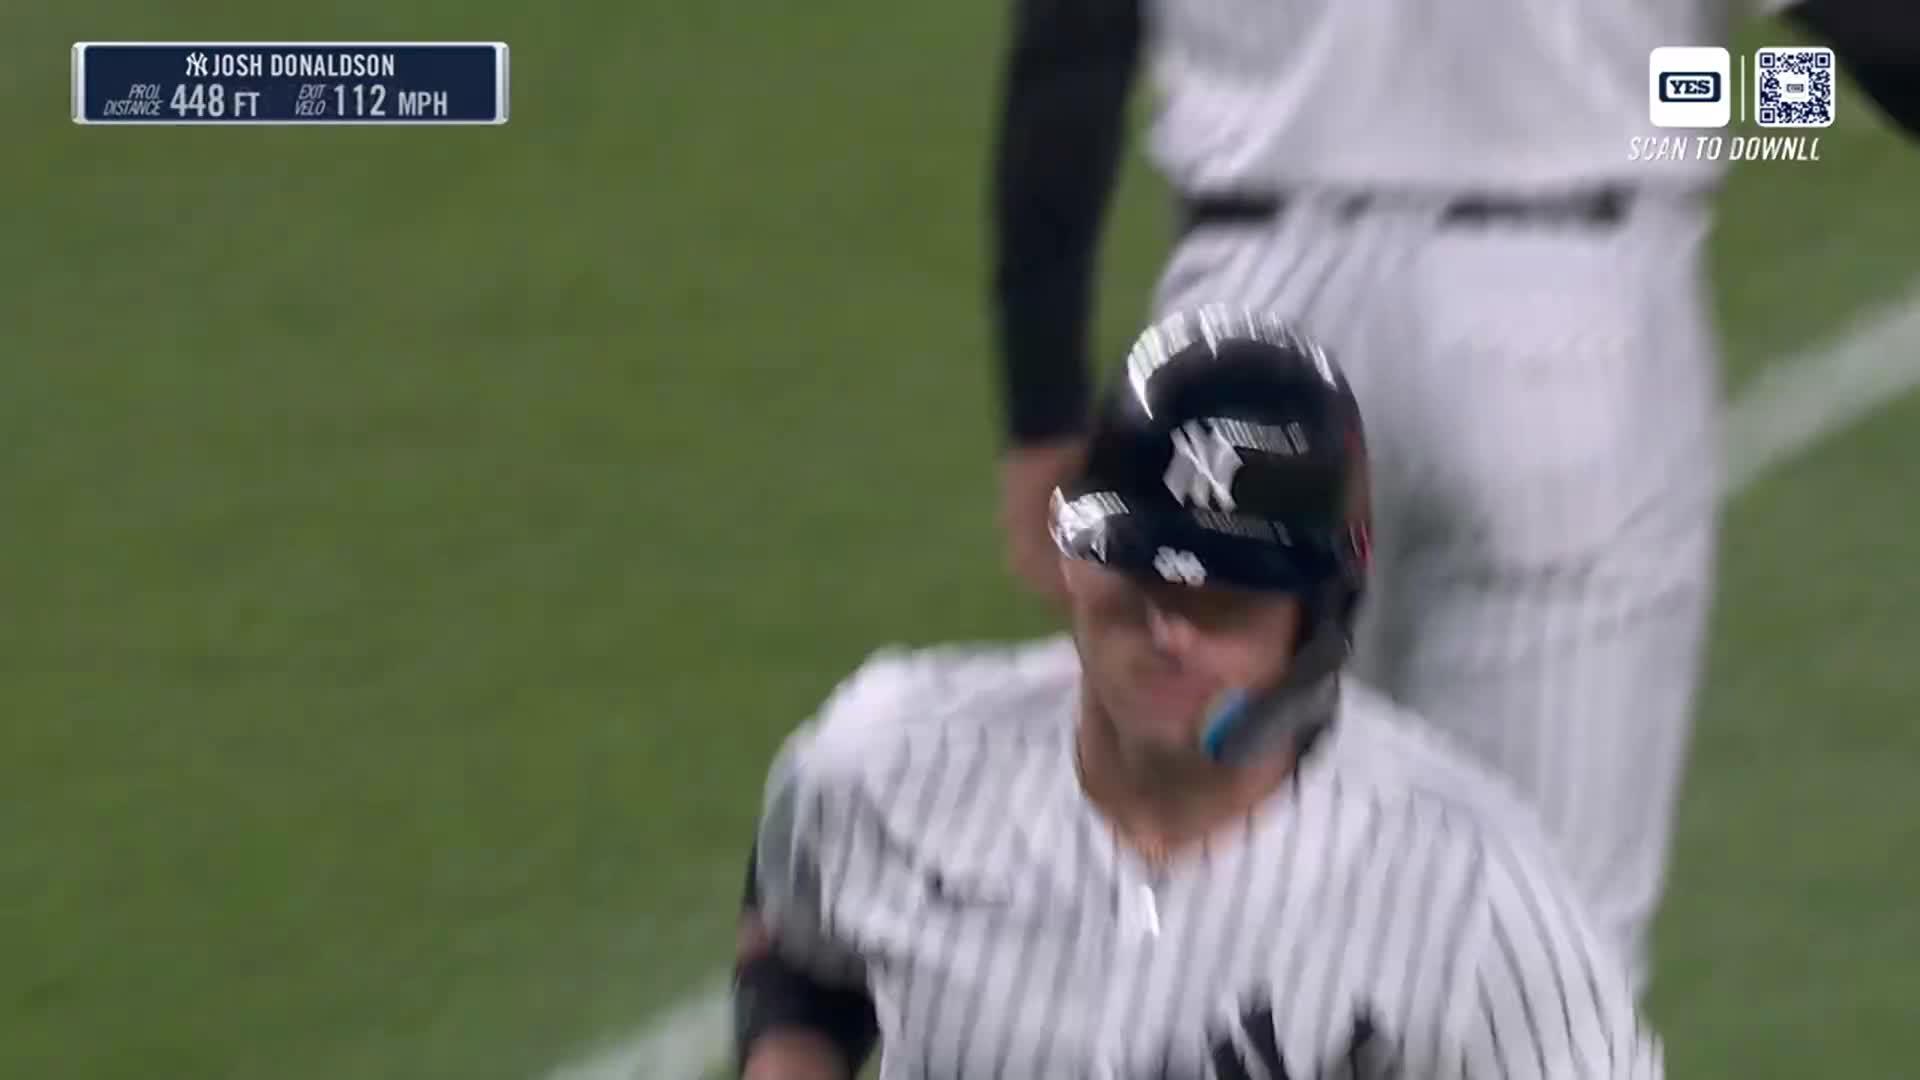 YES Network on X: JOSH DONALDSON SENDS THIS ONE FOR A RIDE